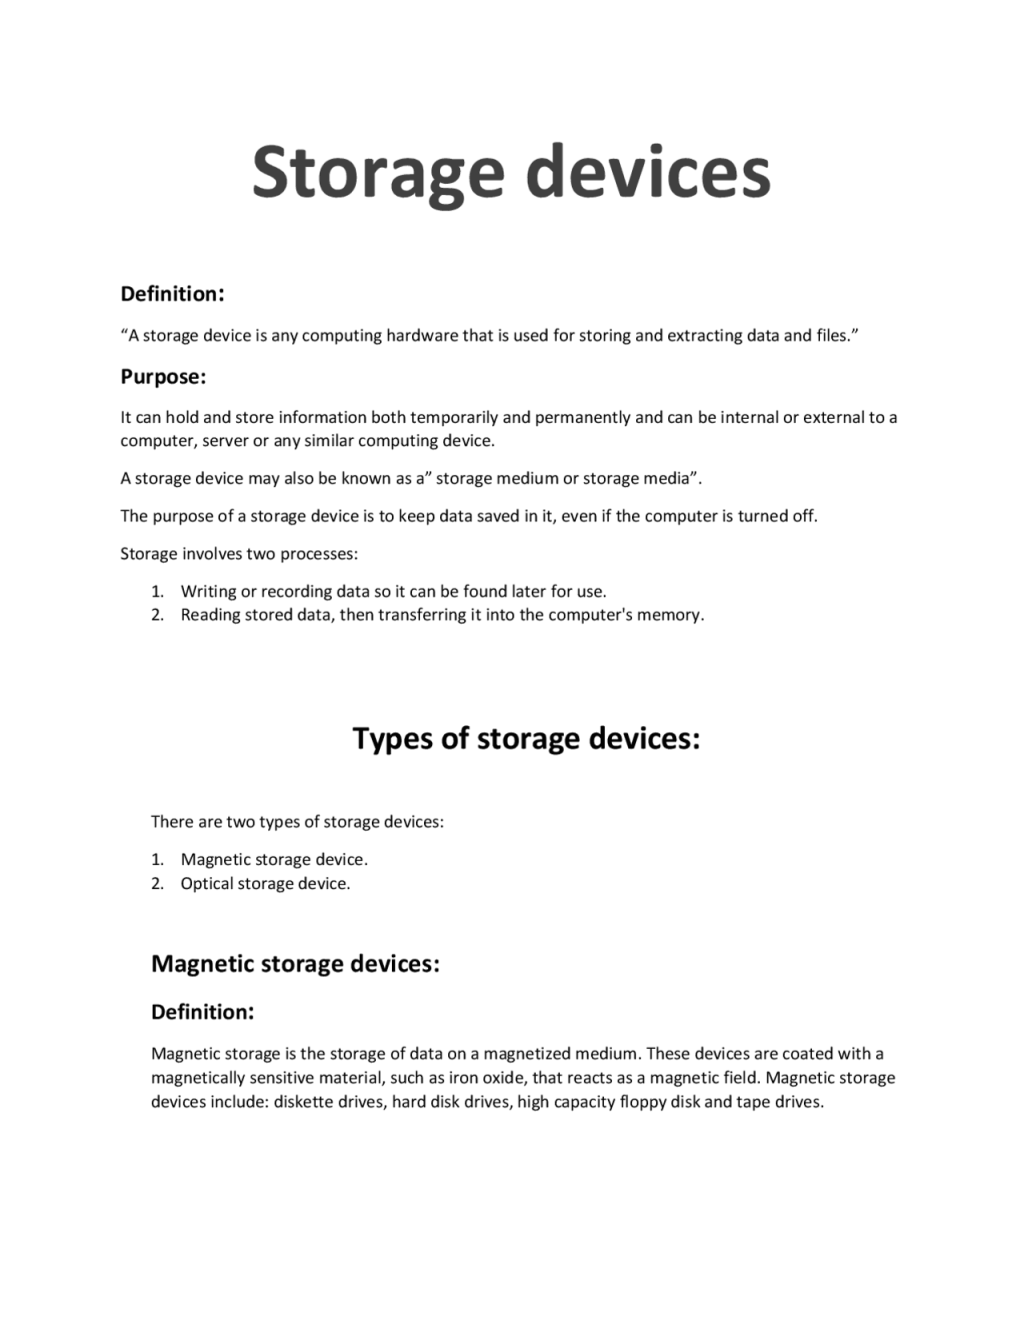 Picture of: Storage devices and its types  Assignments Computer Science  Docsity